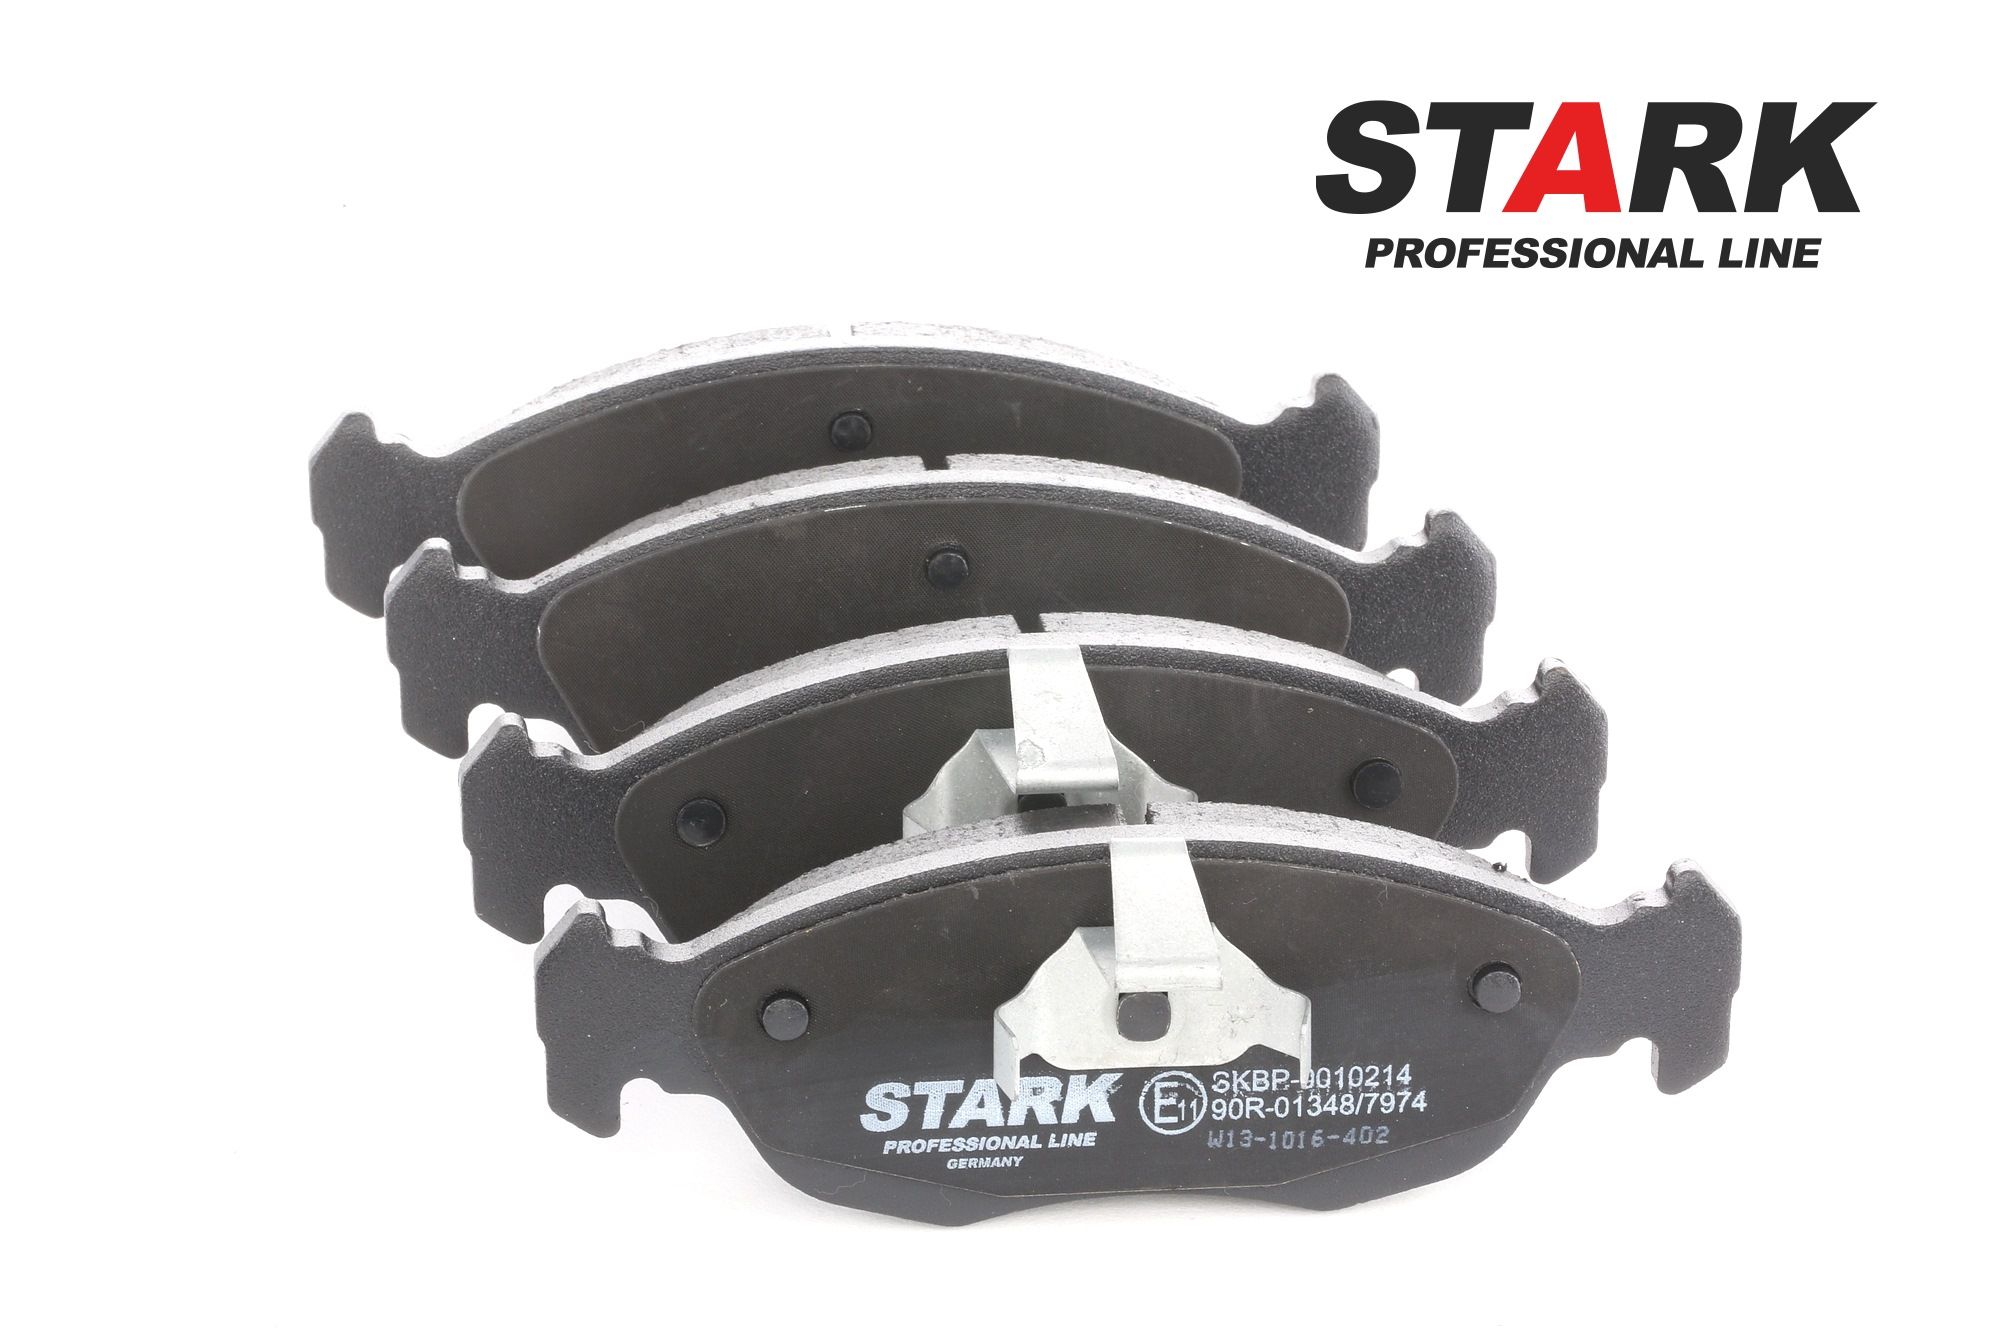 STARK SKBP-0010214 Brake pad set Front Axle, excl. wear warning contact, with piston clip